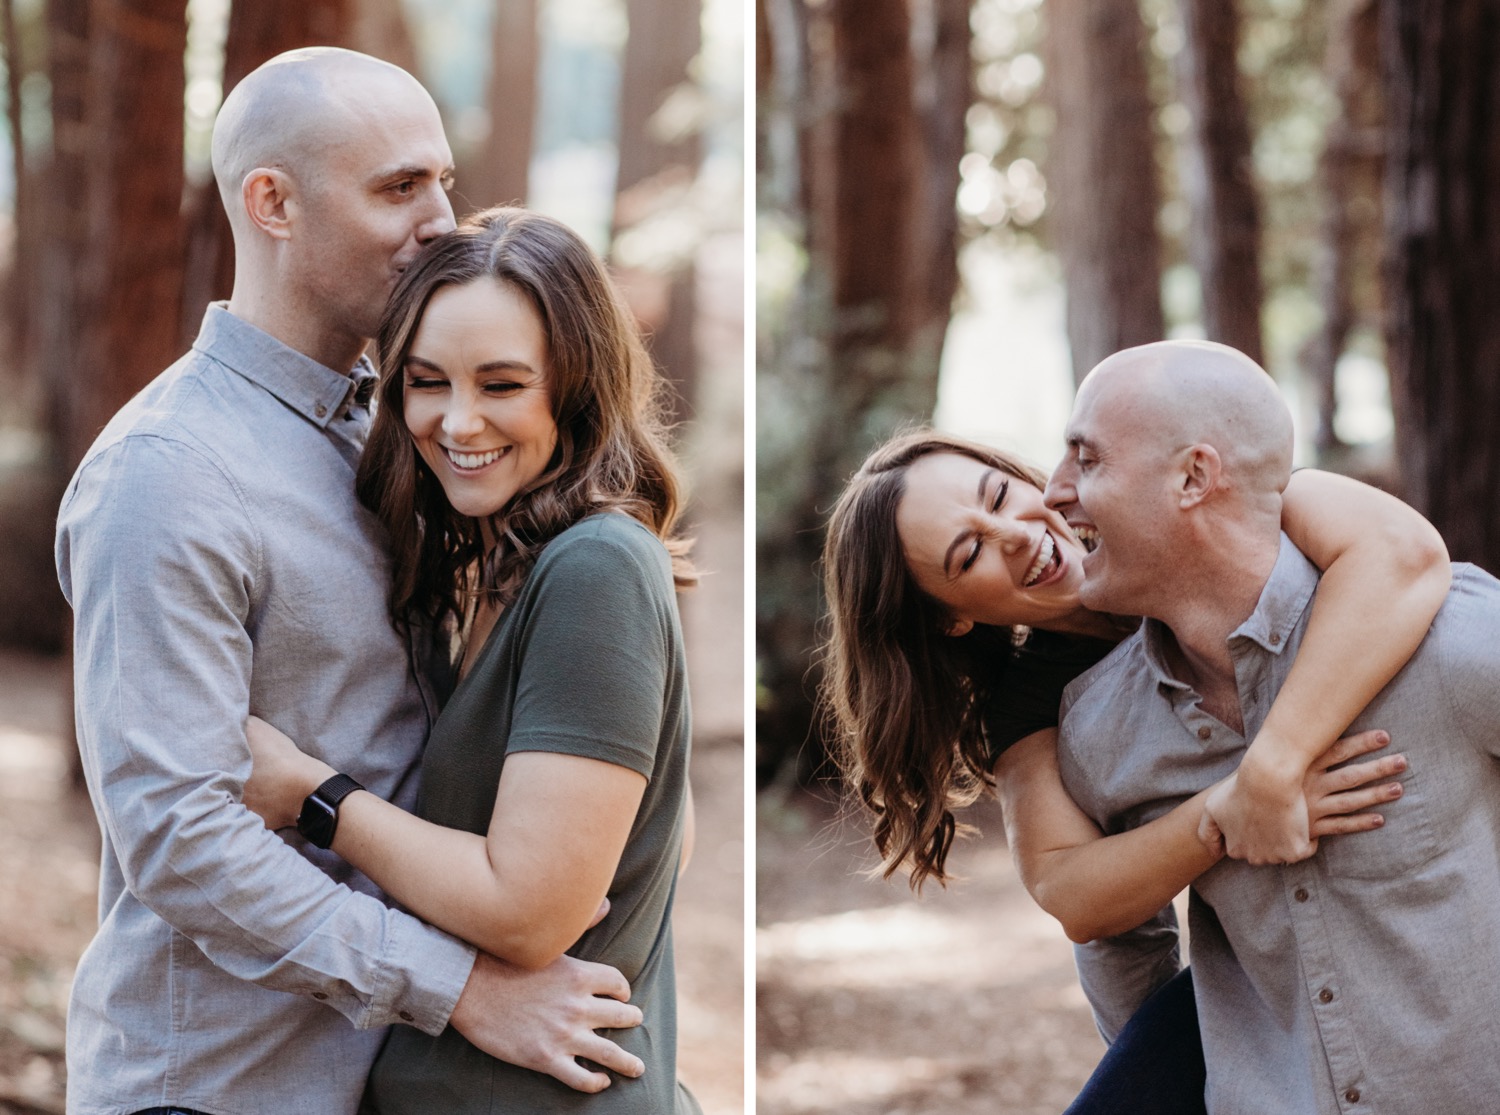 Couples playfully kiss each other on their Golden Gate Park couple photoshoot.